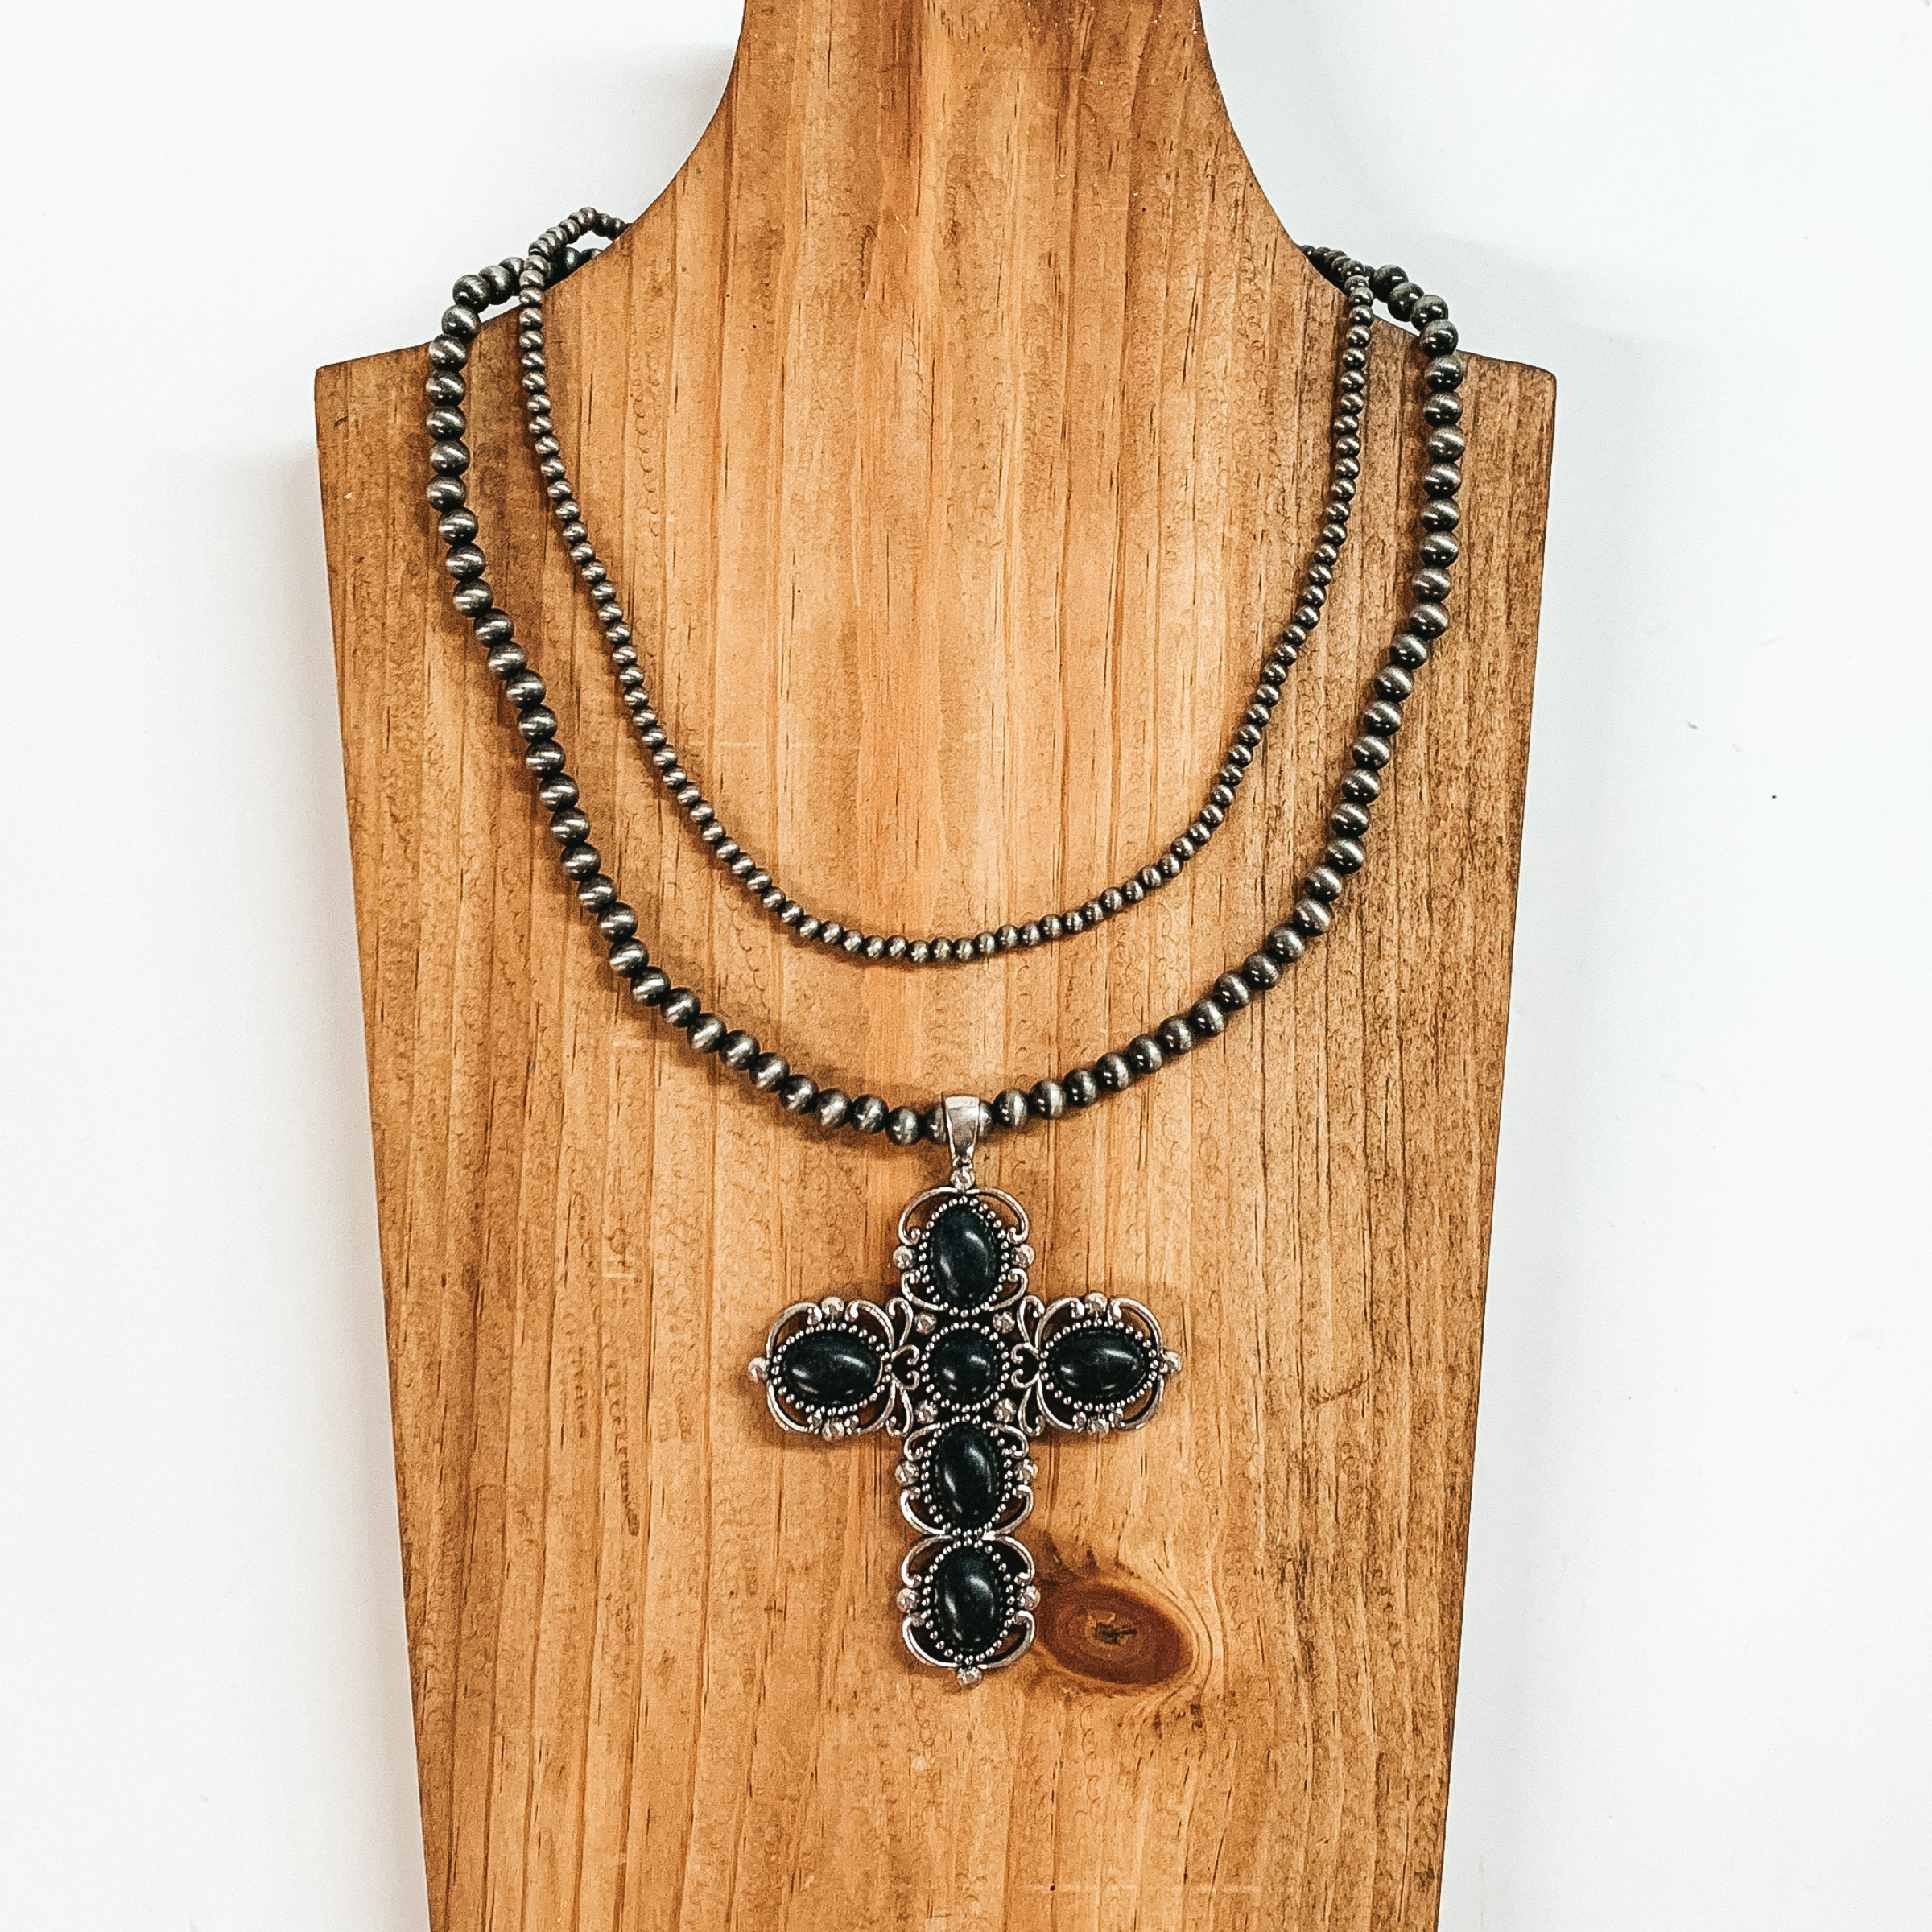 Two strand neckace with different sized silver beaded strands of different lengths with a cross pendant that has black stones. This necklace is pictured on a wooden necklace holder on a white background. 